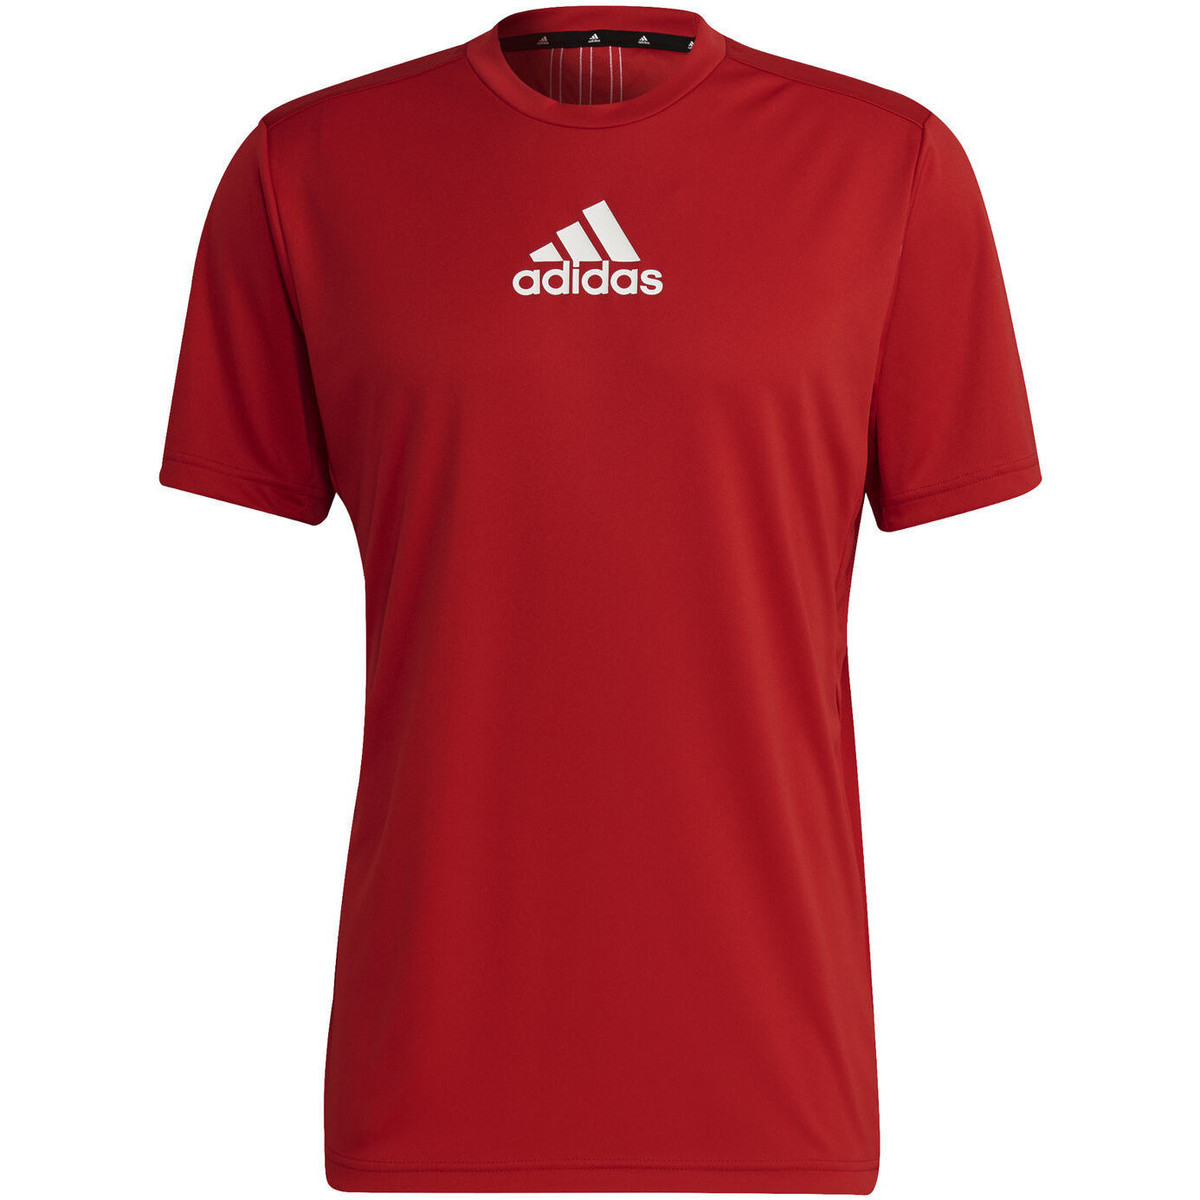 Vêtements Homme adidas born original price in india today 22 carat T-shirt Sport 3-stripes Rouge